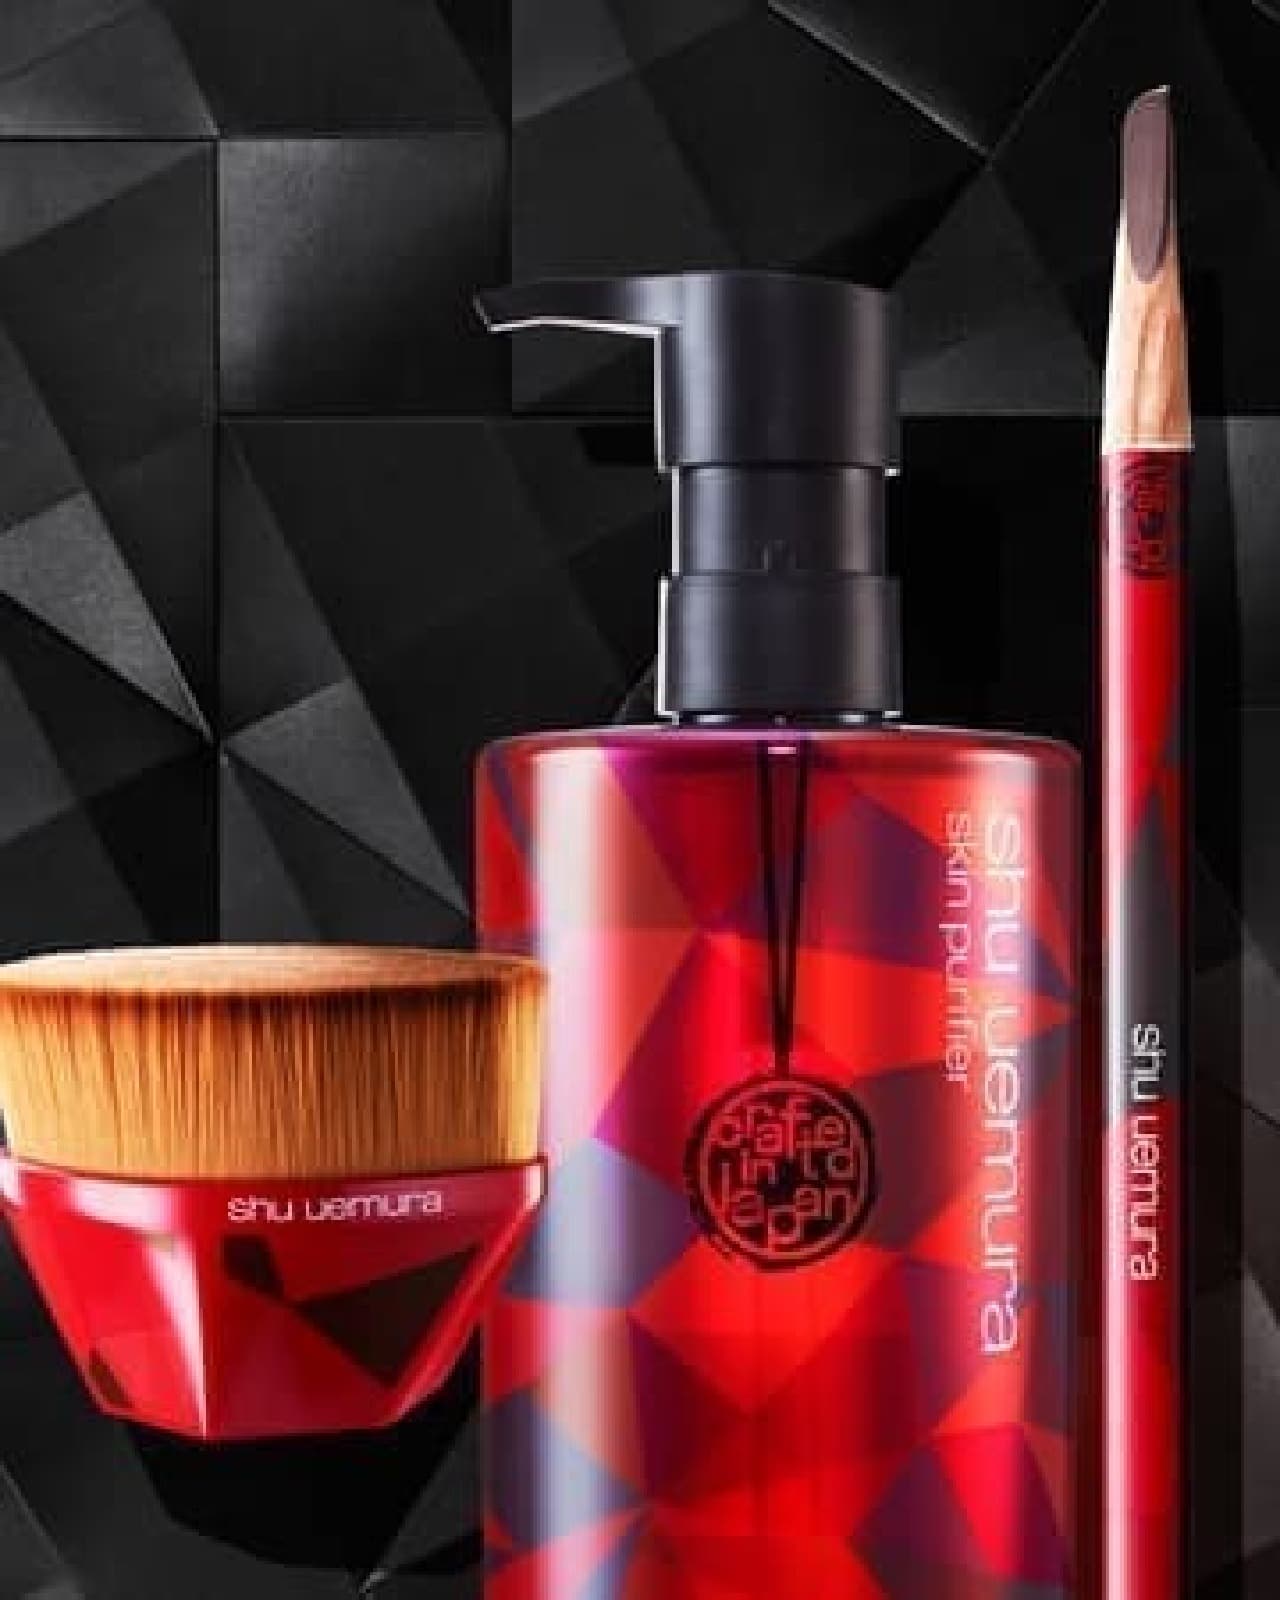 Shu Uemura "Mind Free Crafted in Japan Collection"